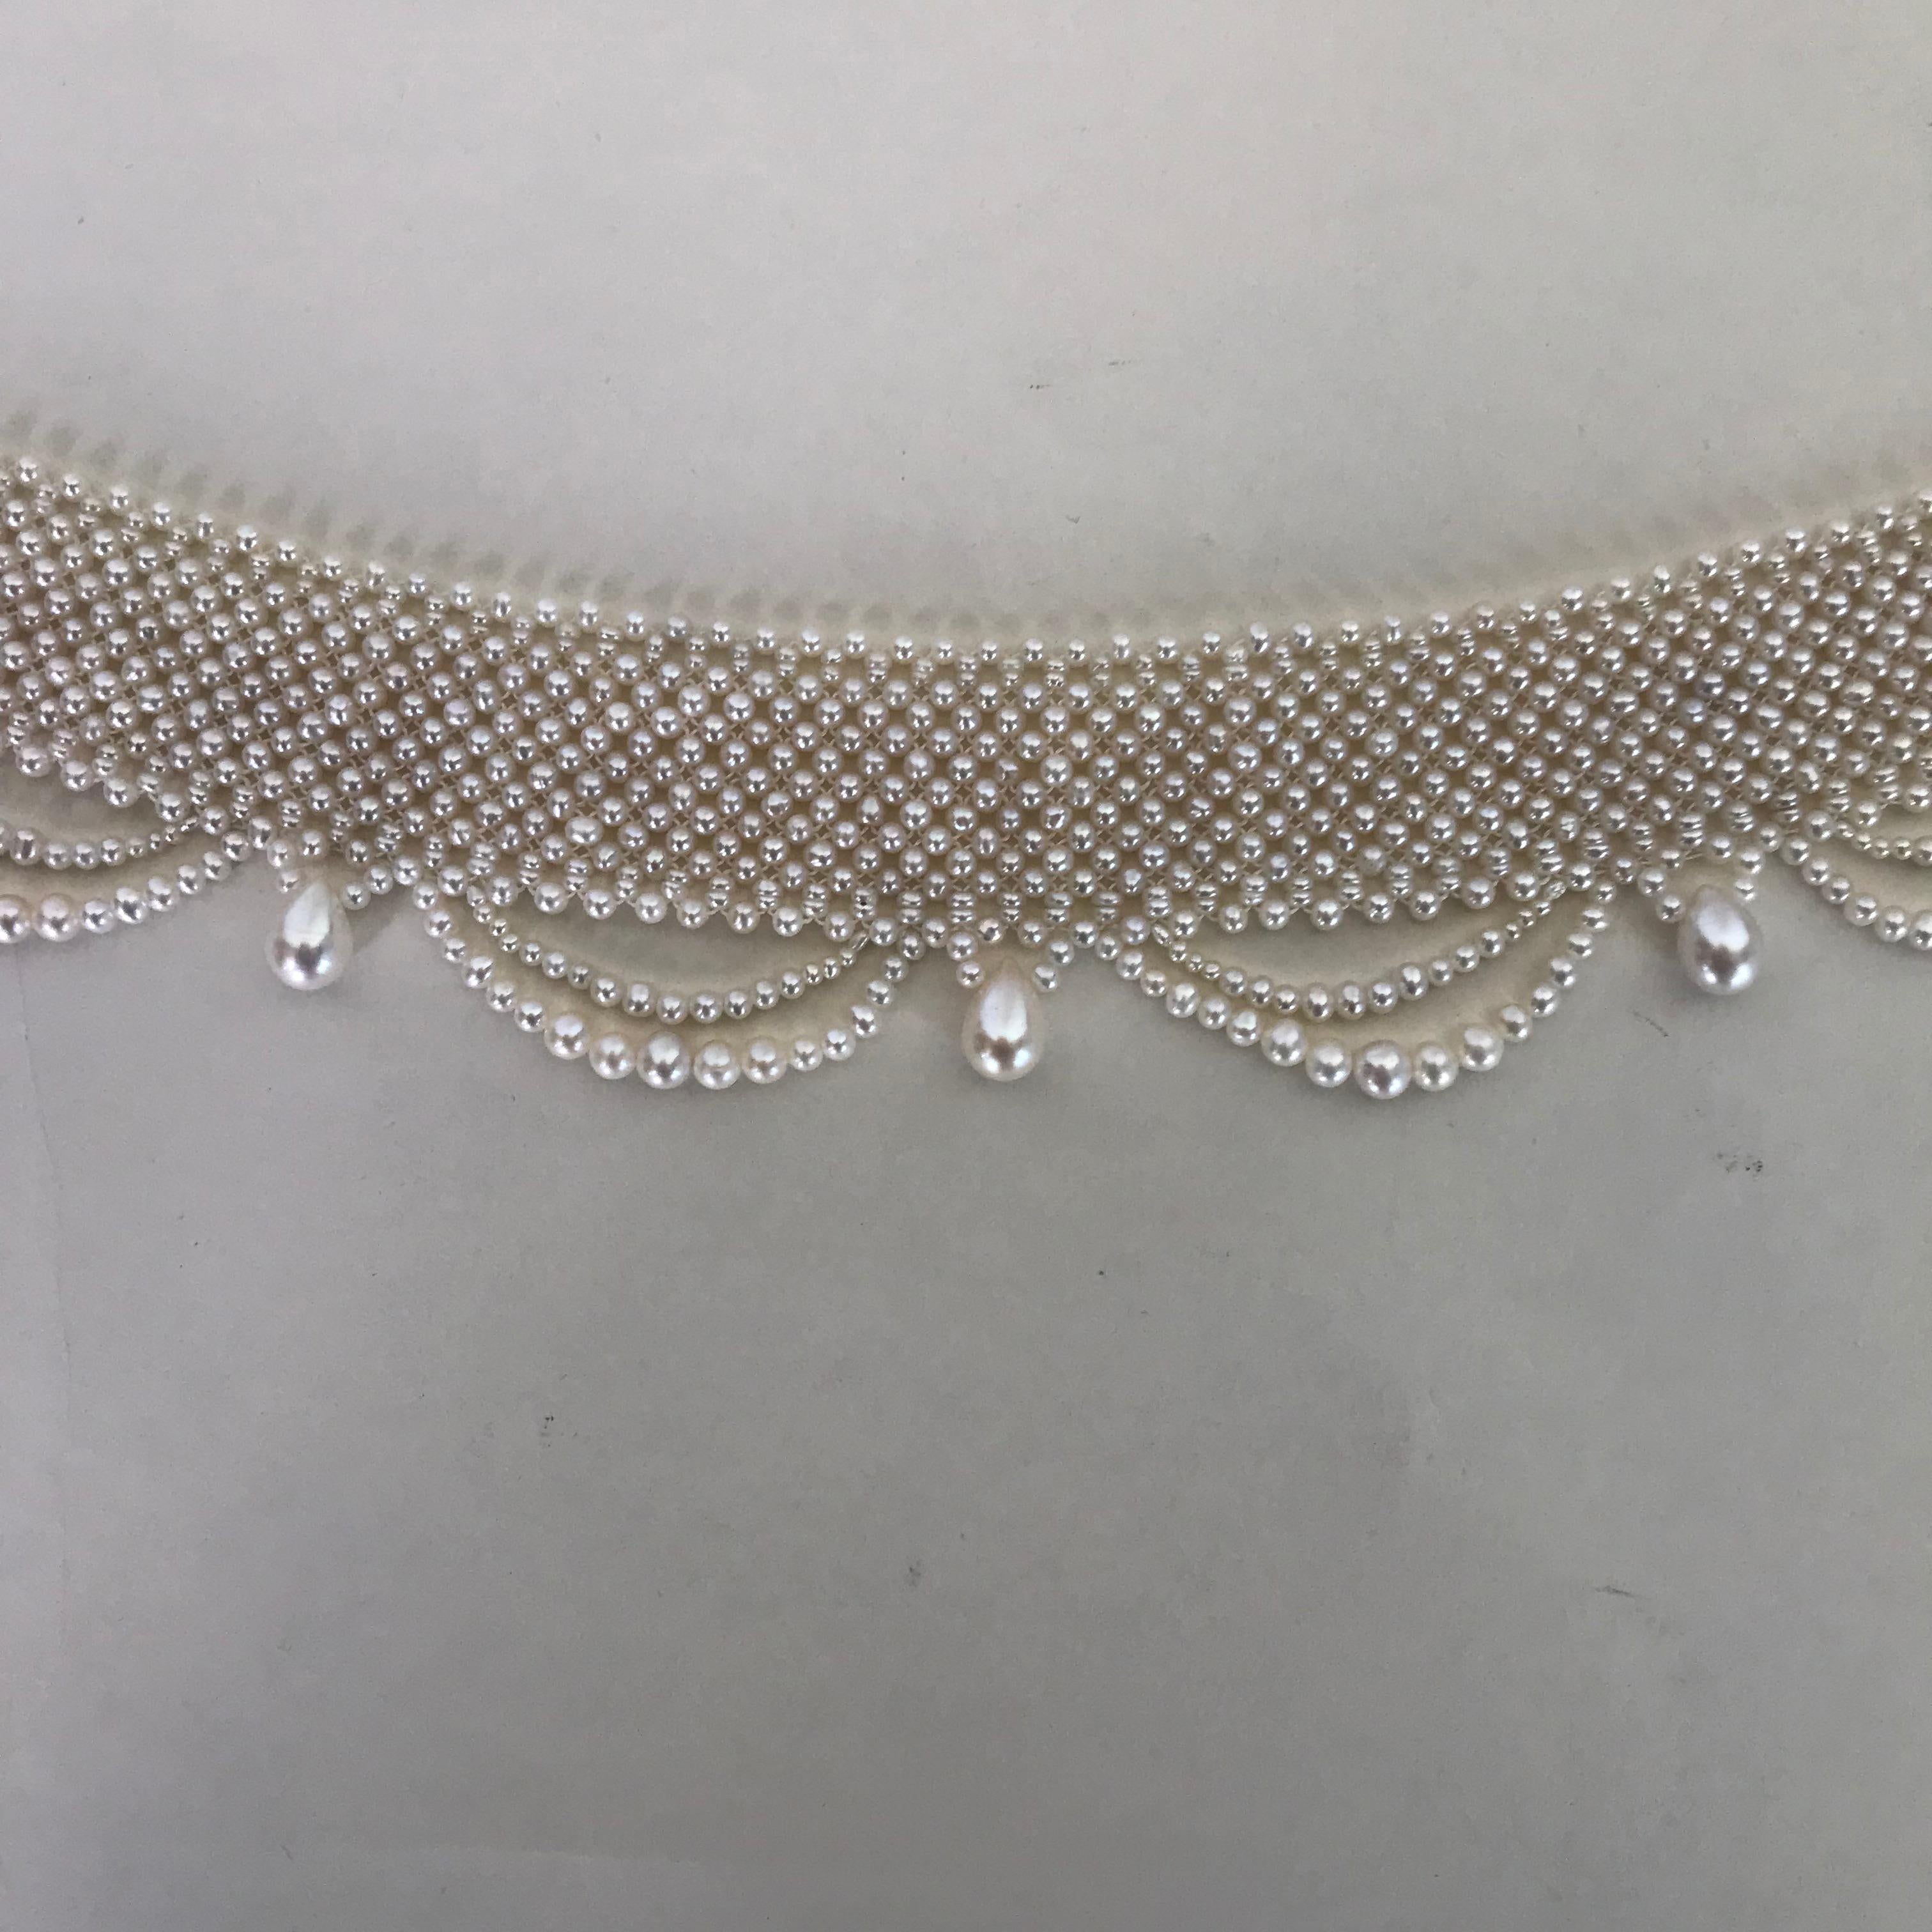 Marina J. Woven Pearl Draped Choker with Pearl drops and secure sliding clasp 2